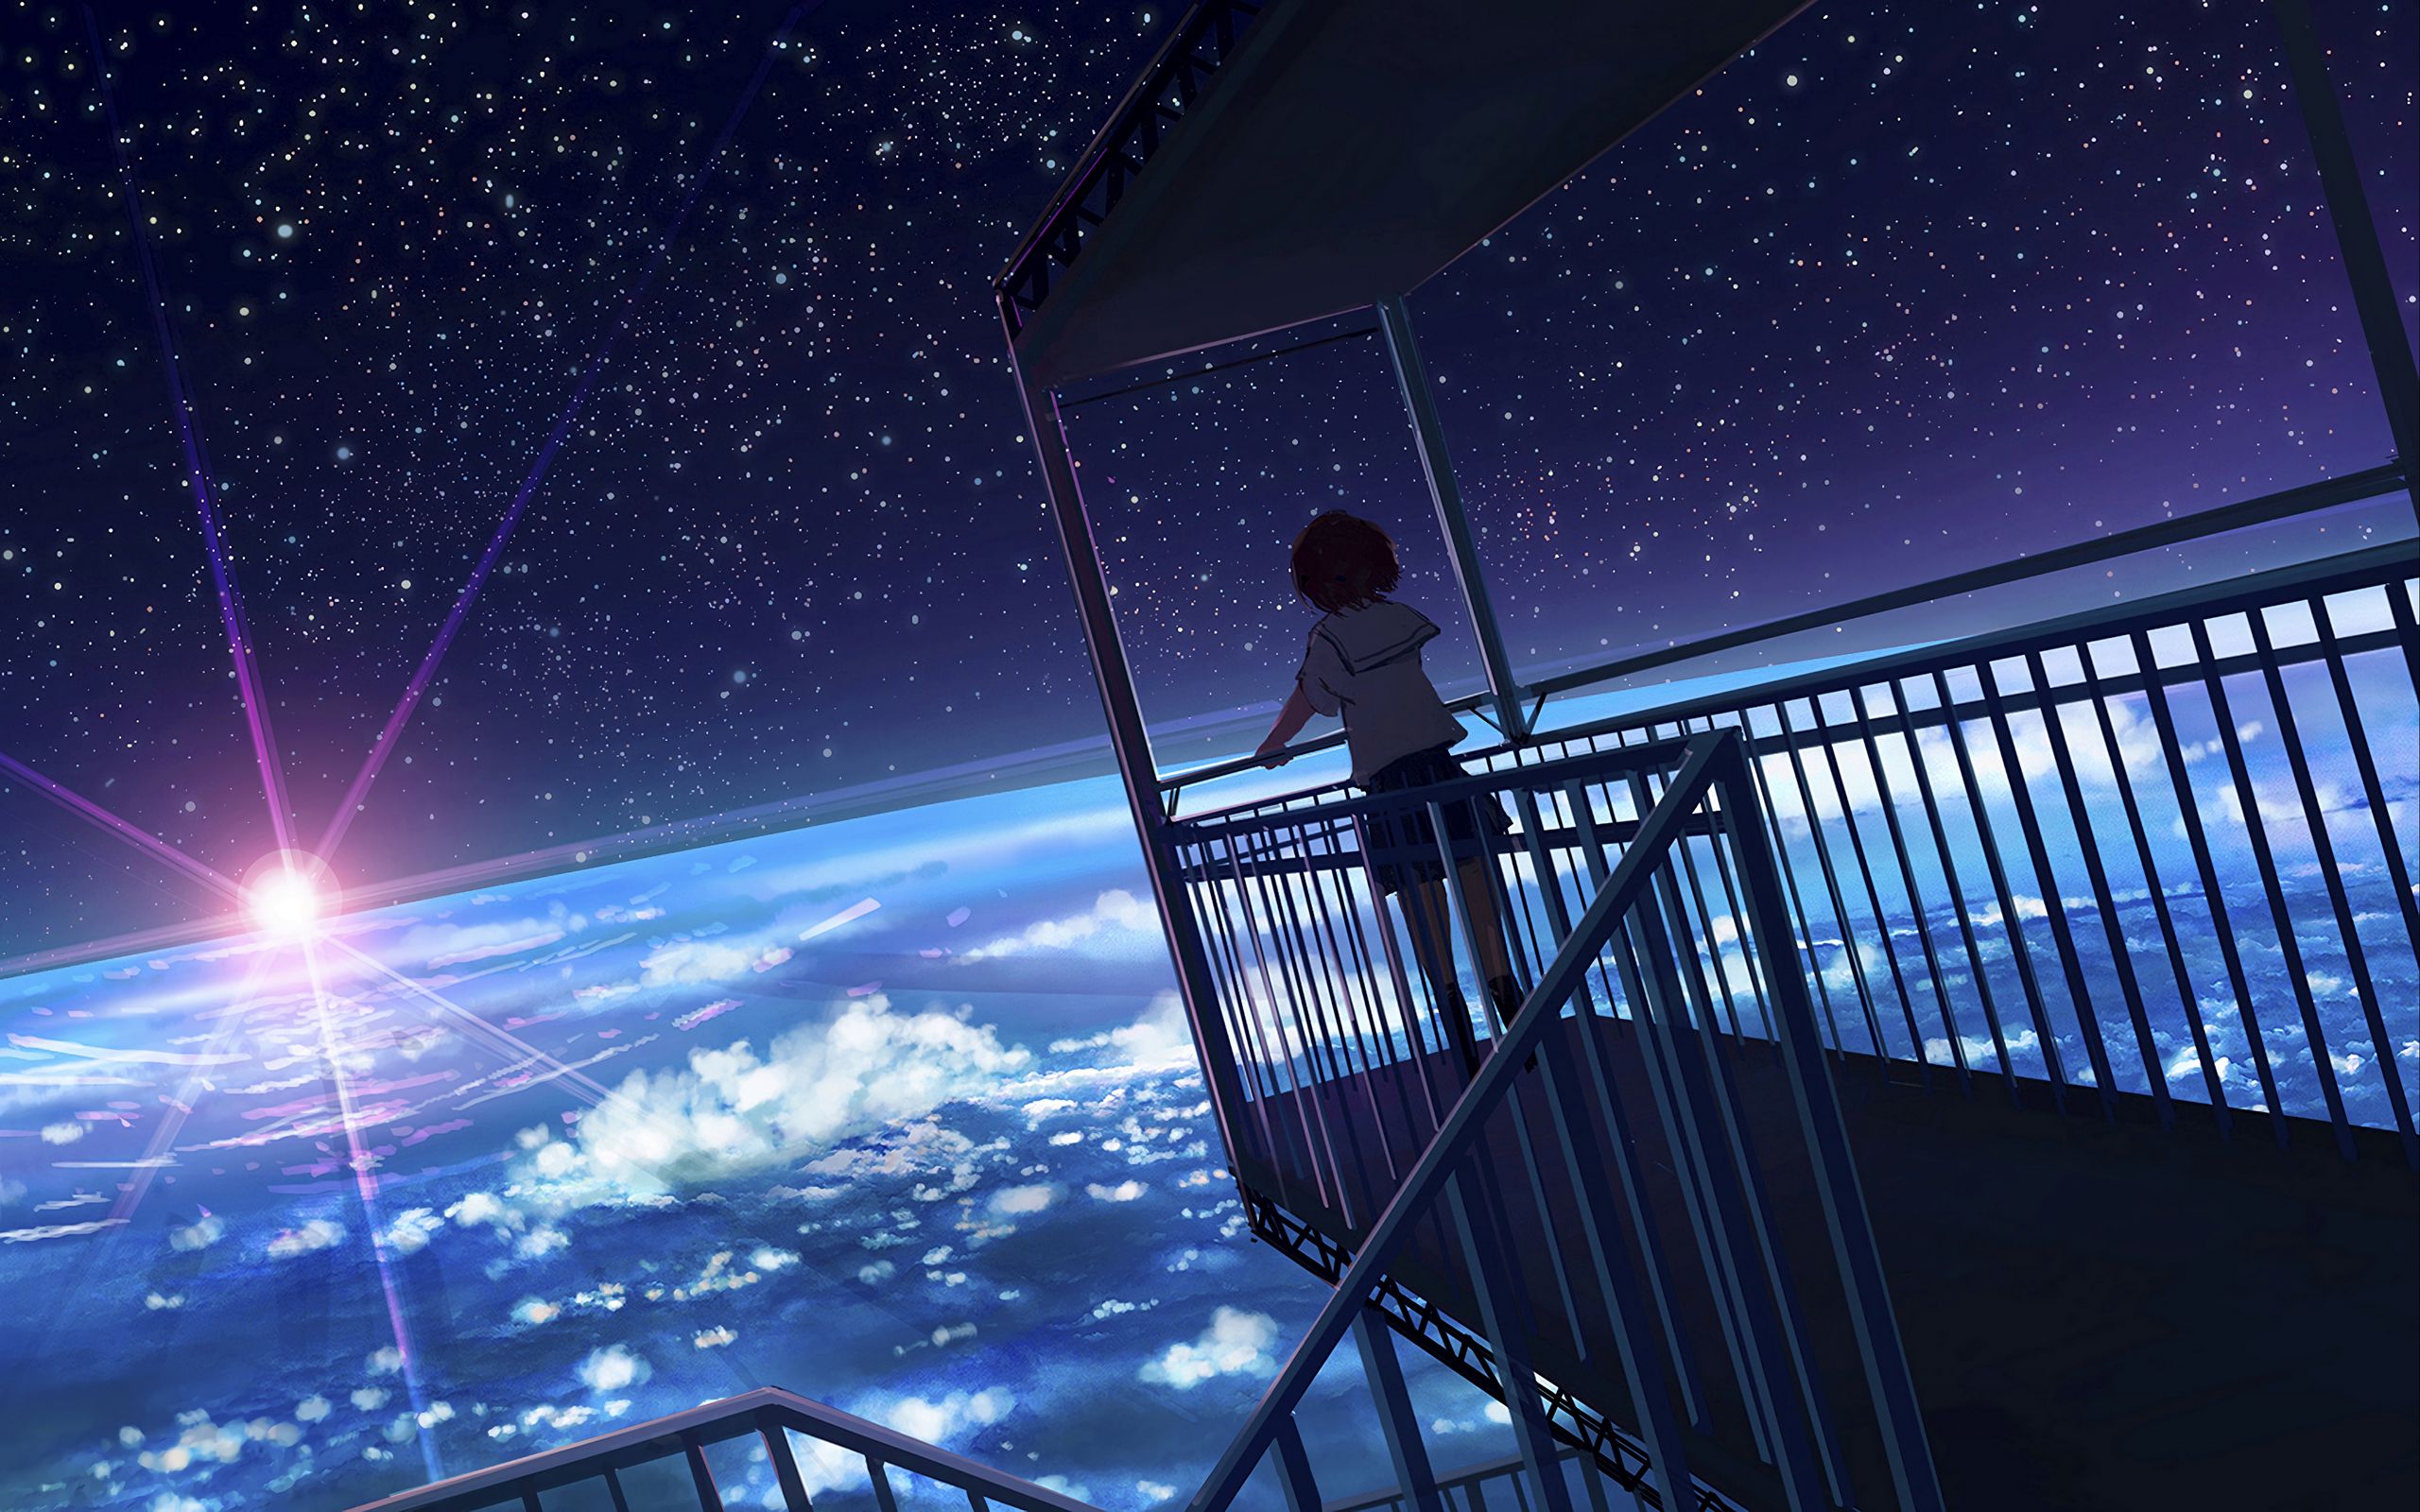 Download wallpaper 2560x1600 girl, form, view, earth, space, anime  widescreen 16:10 hd background